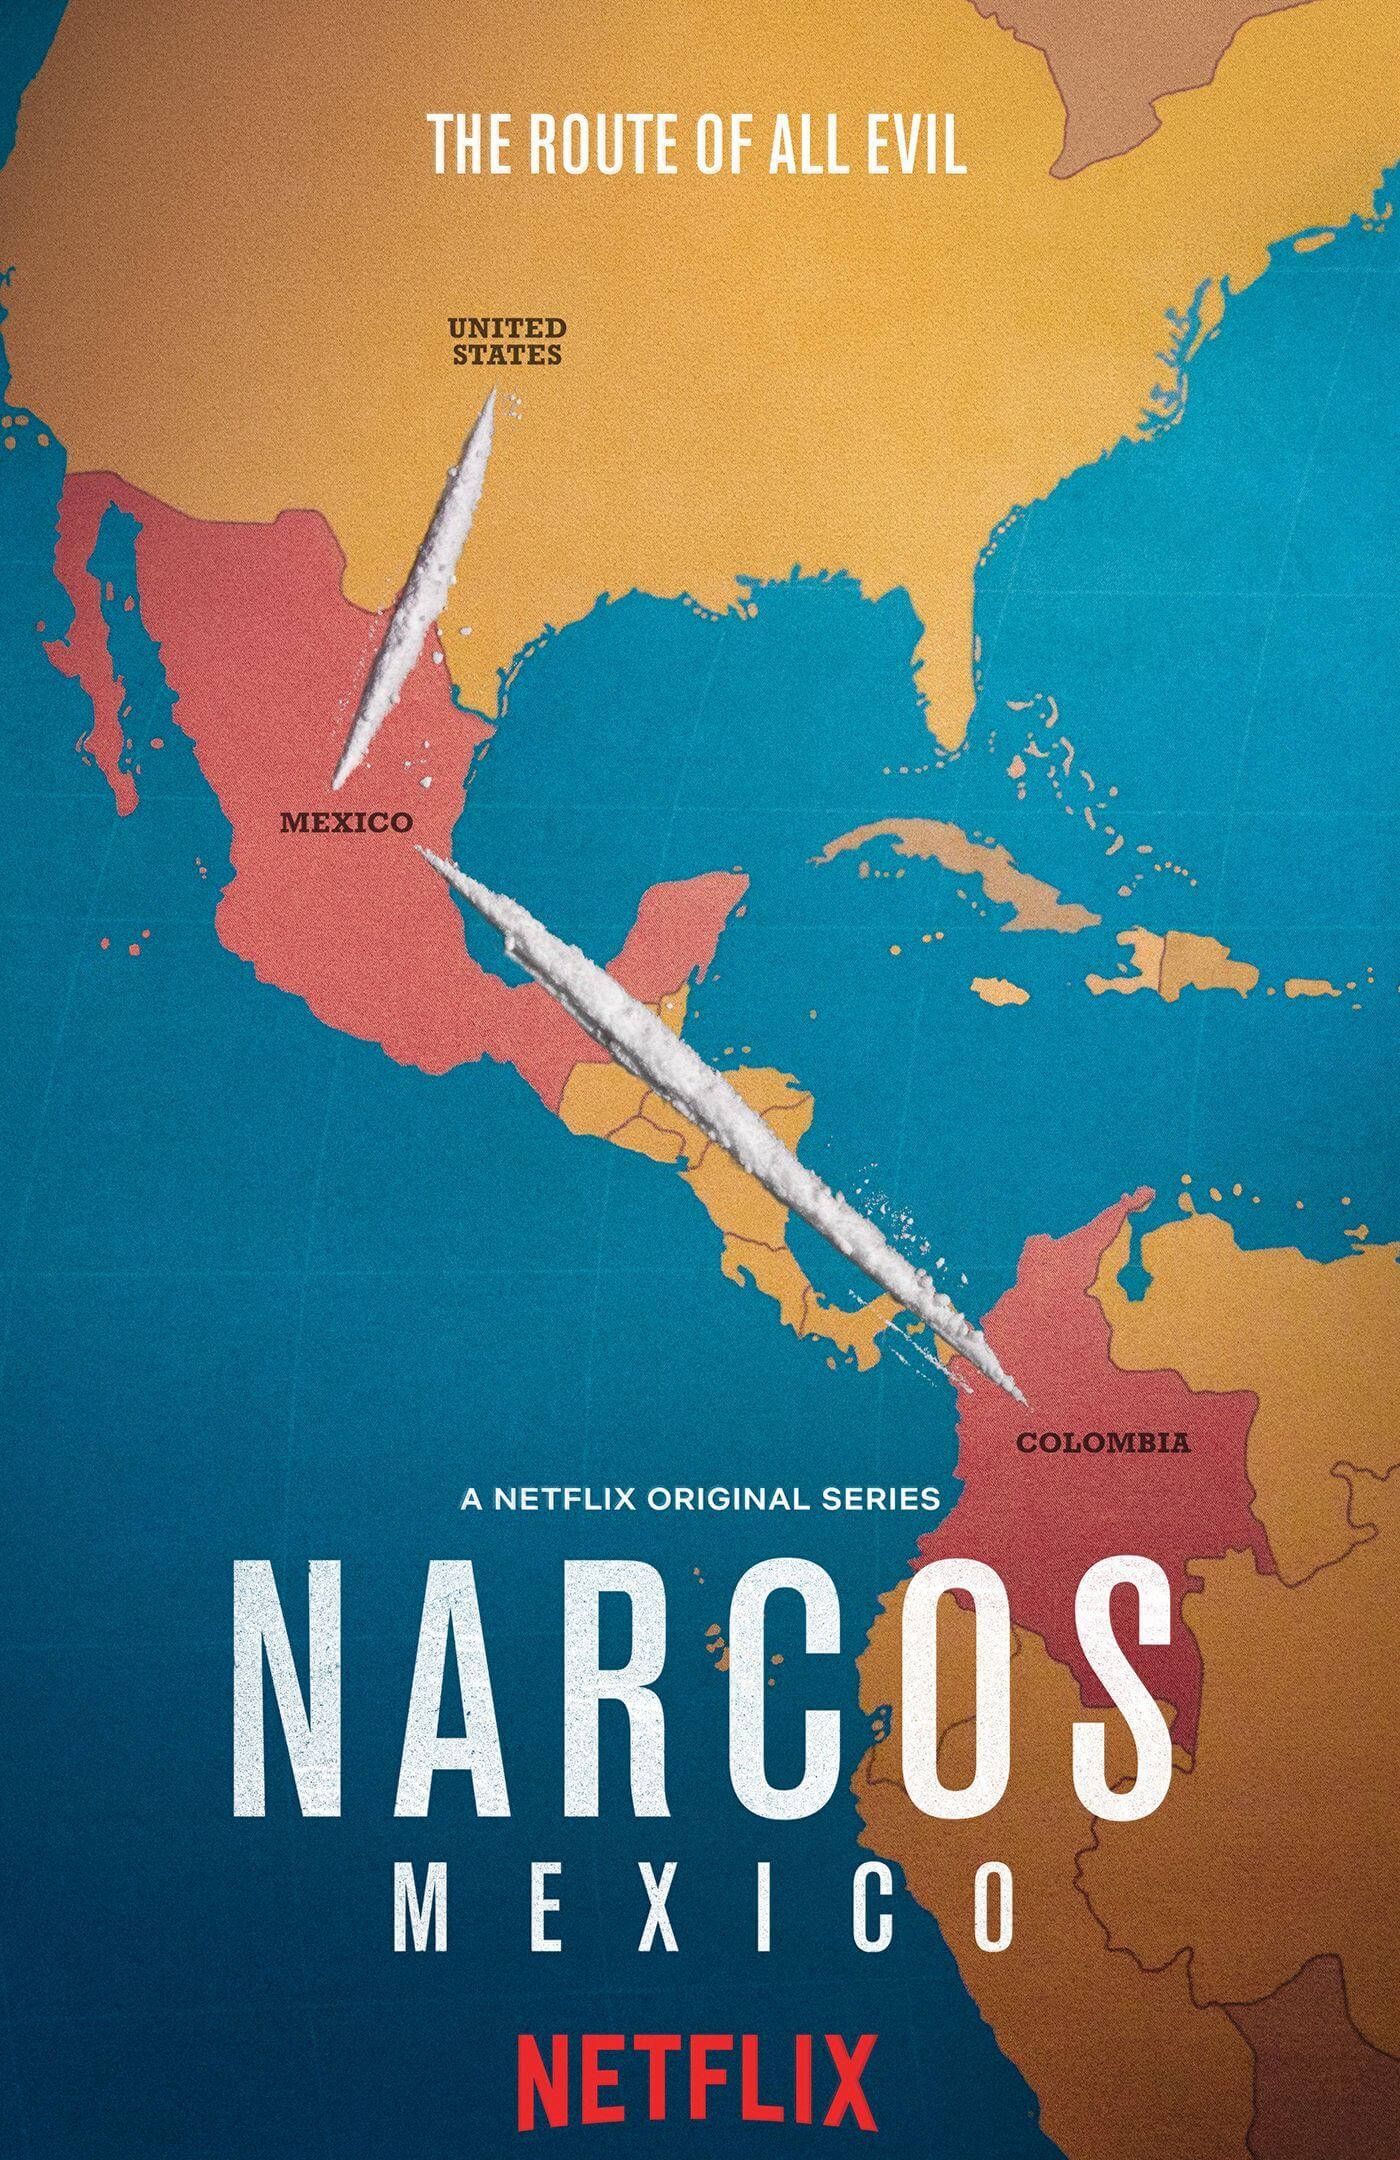 Narcos Mexico - Netflix TV Show Poster Fan - Framed Prints by Tallenge Store | Buy Posters, Frames, Canvas Digital Art Prints | Small, Compact, Medium and Large Variants